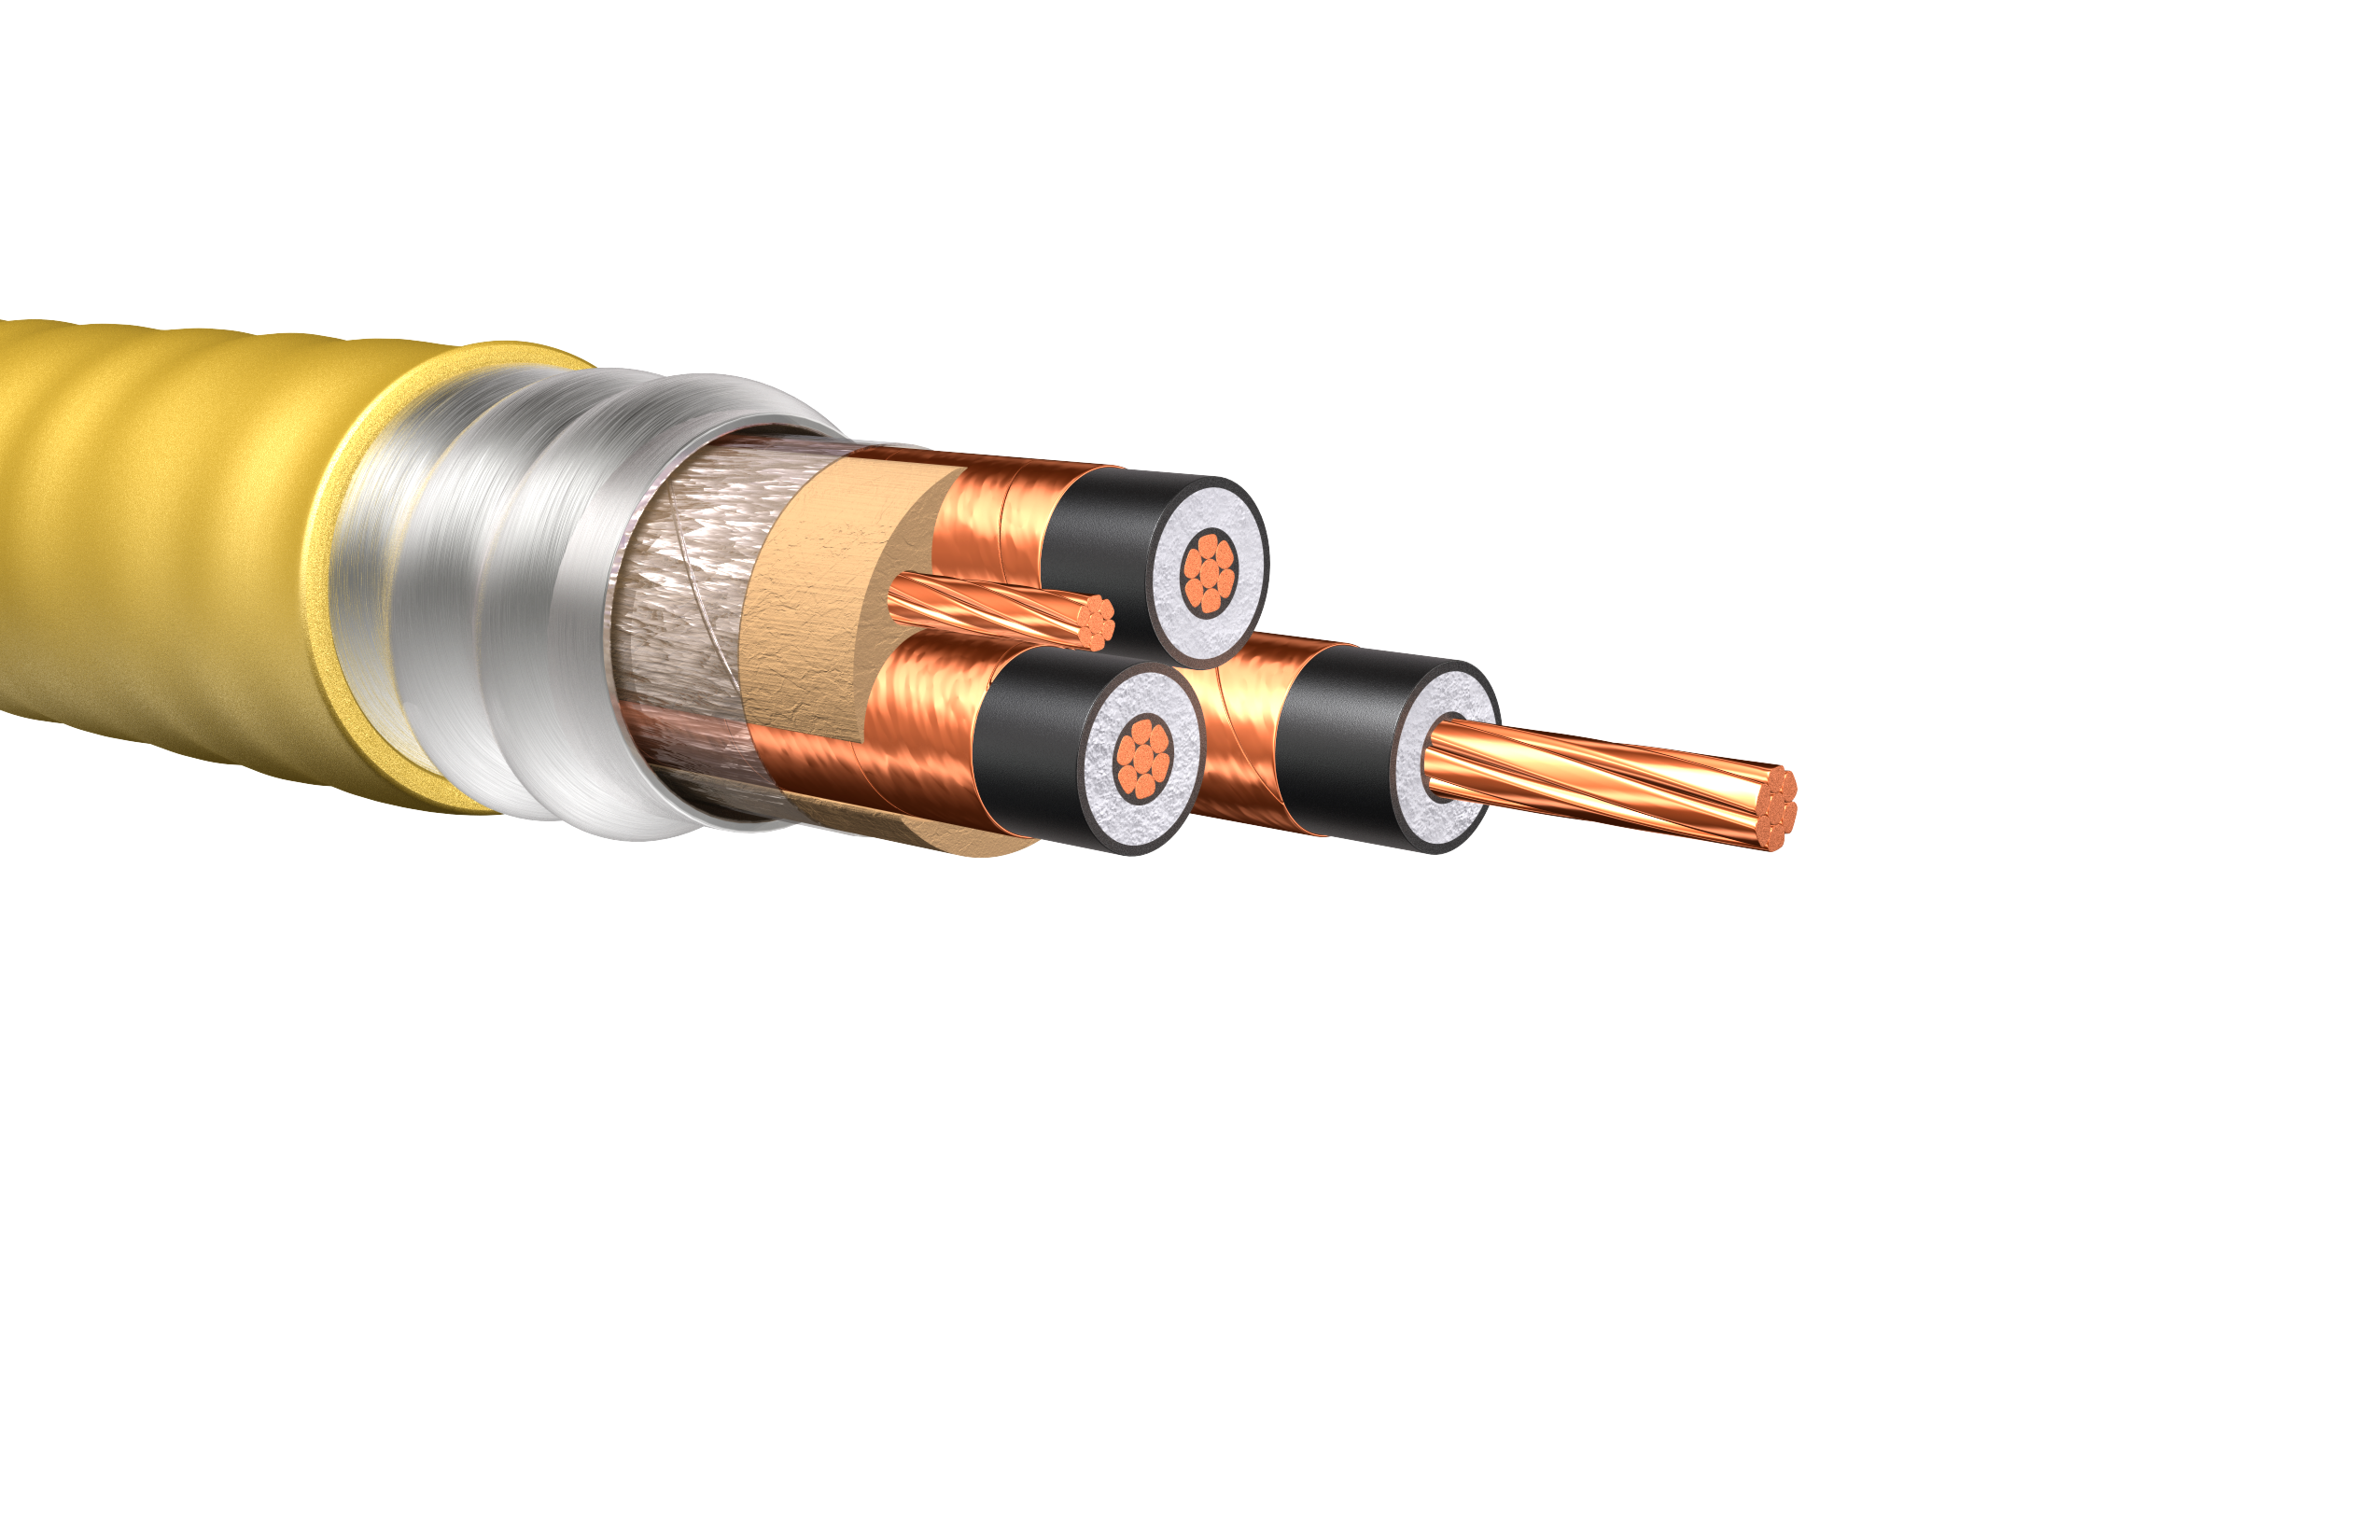 HW315: 5kV AIA Shielded Cable, Type MC